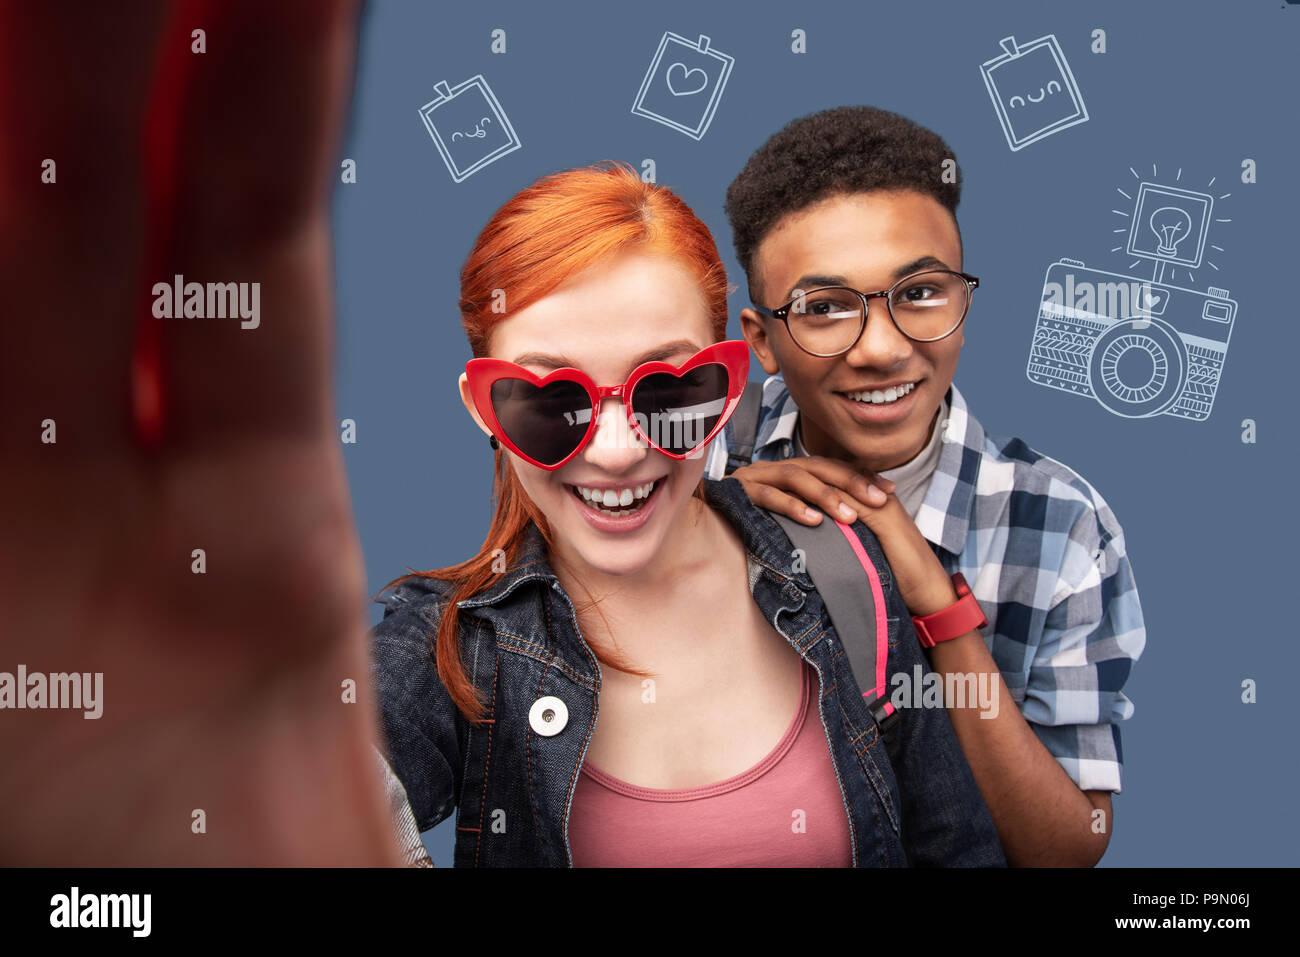 Happy girl holding a camera and taking selfie with her boyfriend Stock Photo